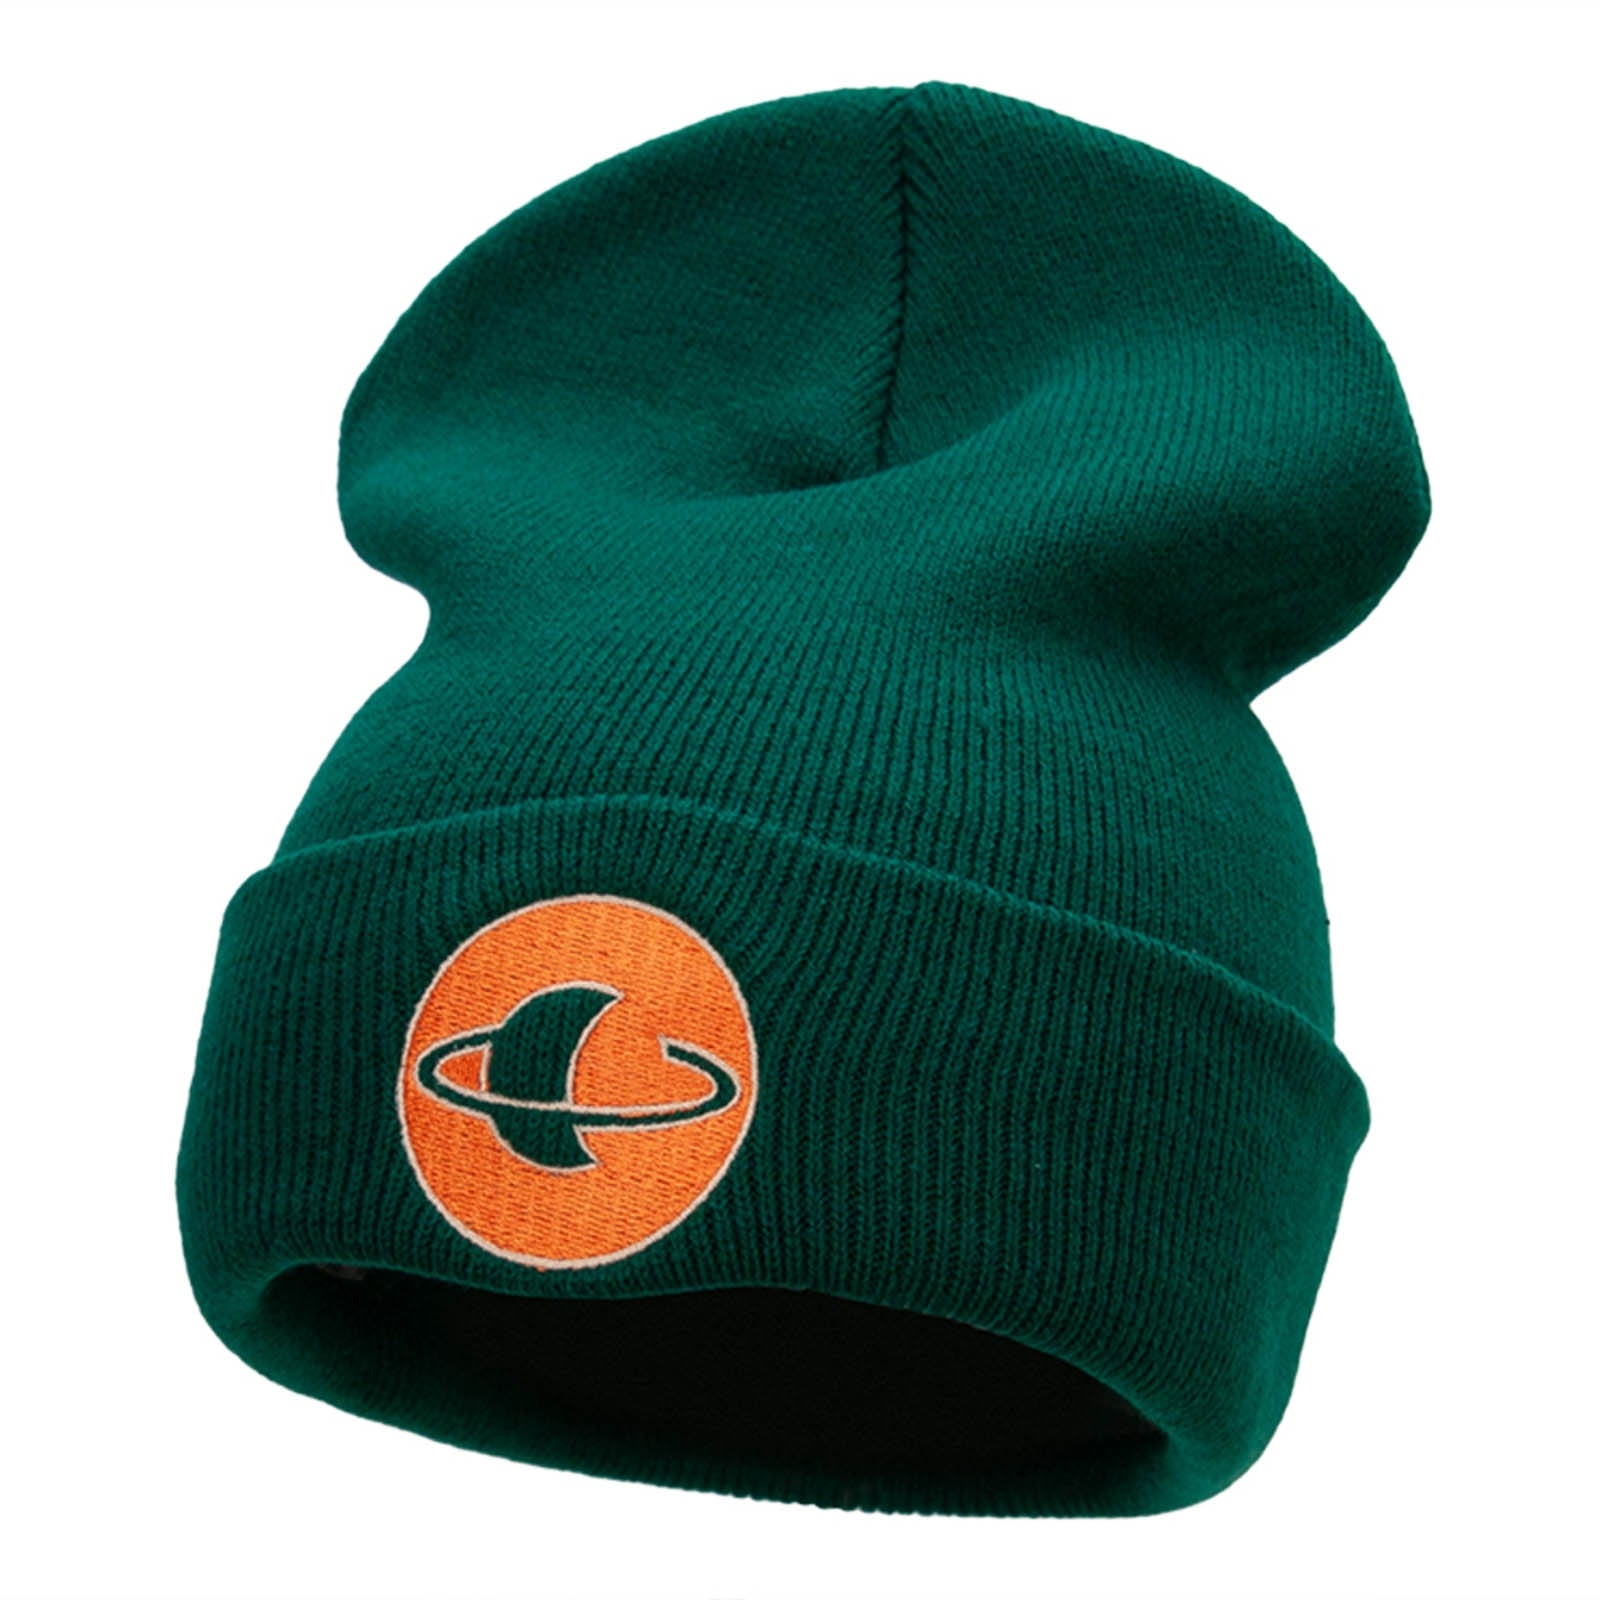 Saturn Insignia Embroidered Long Knitted Beanie - Dk Green OSFM